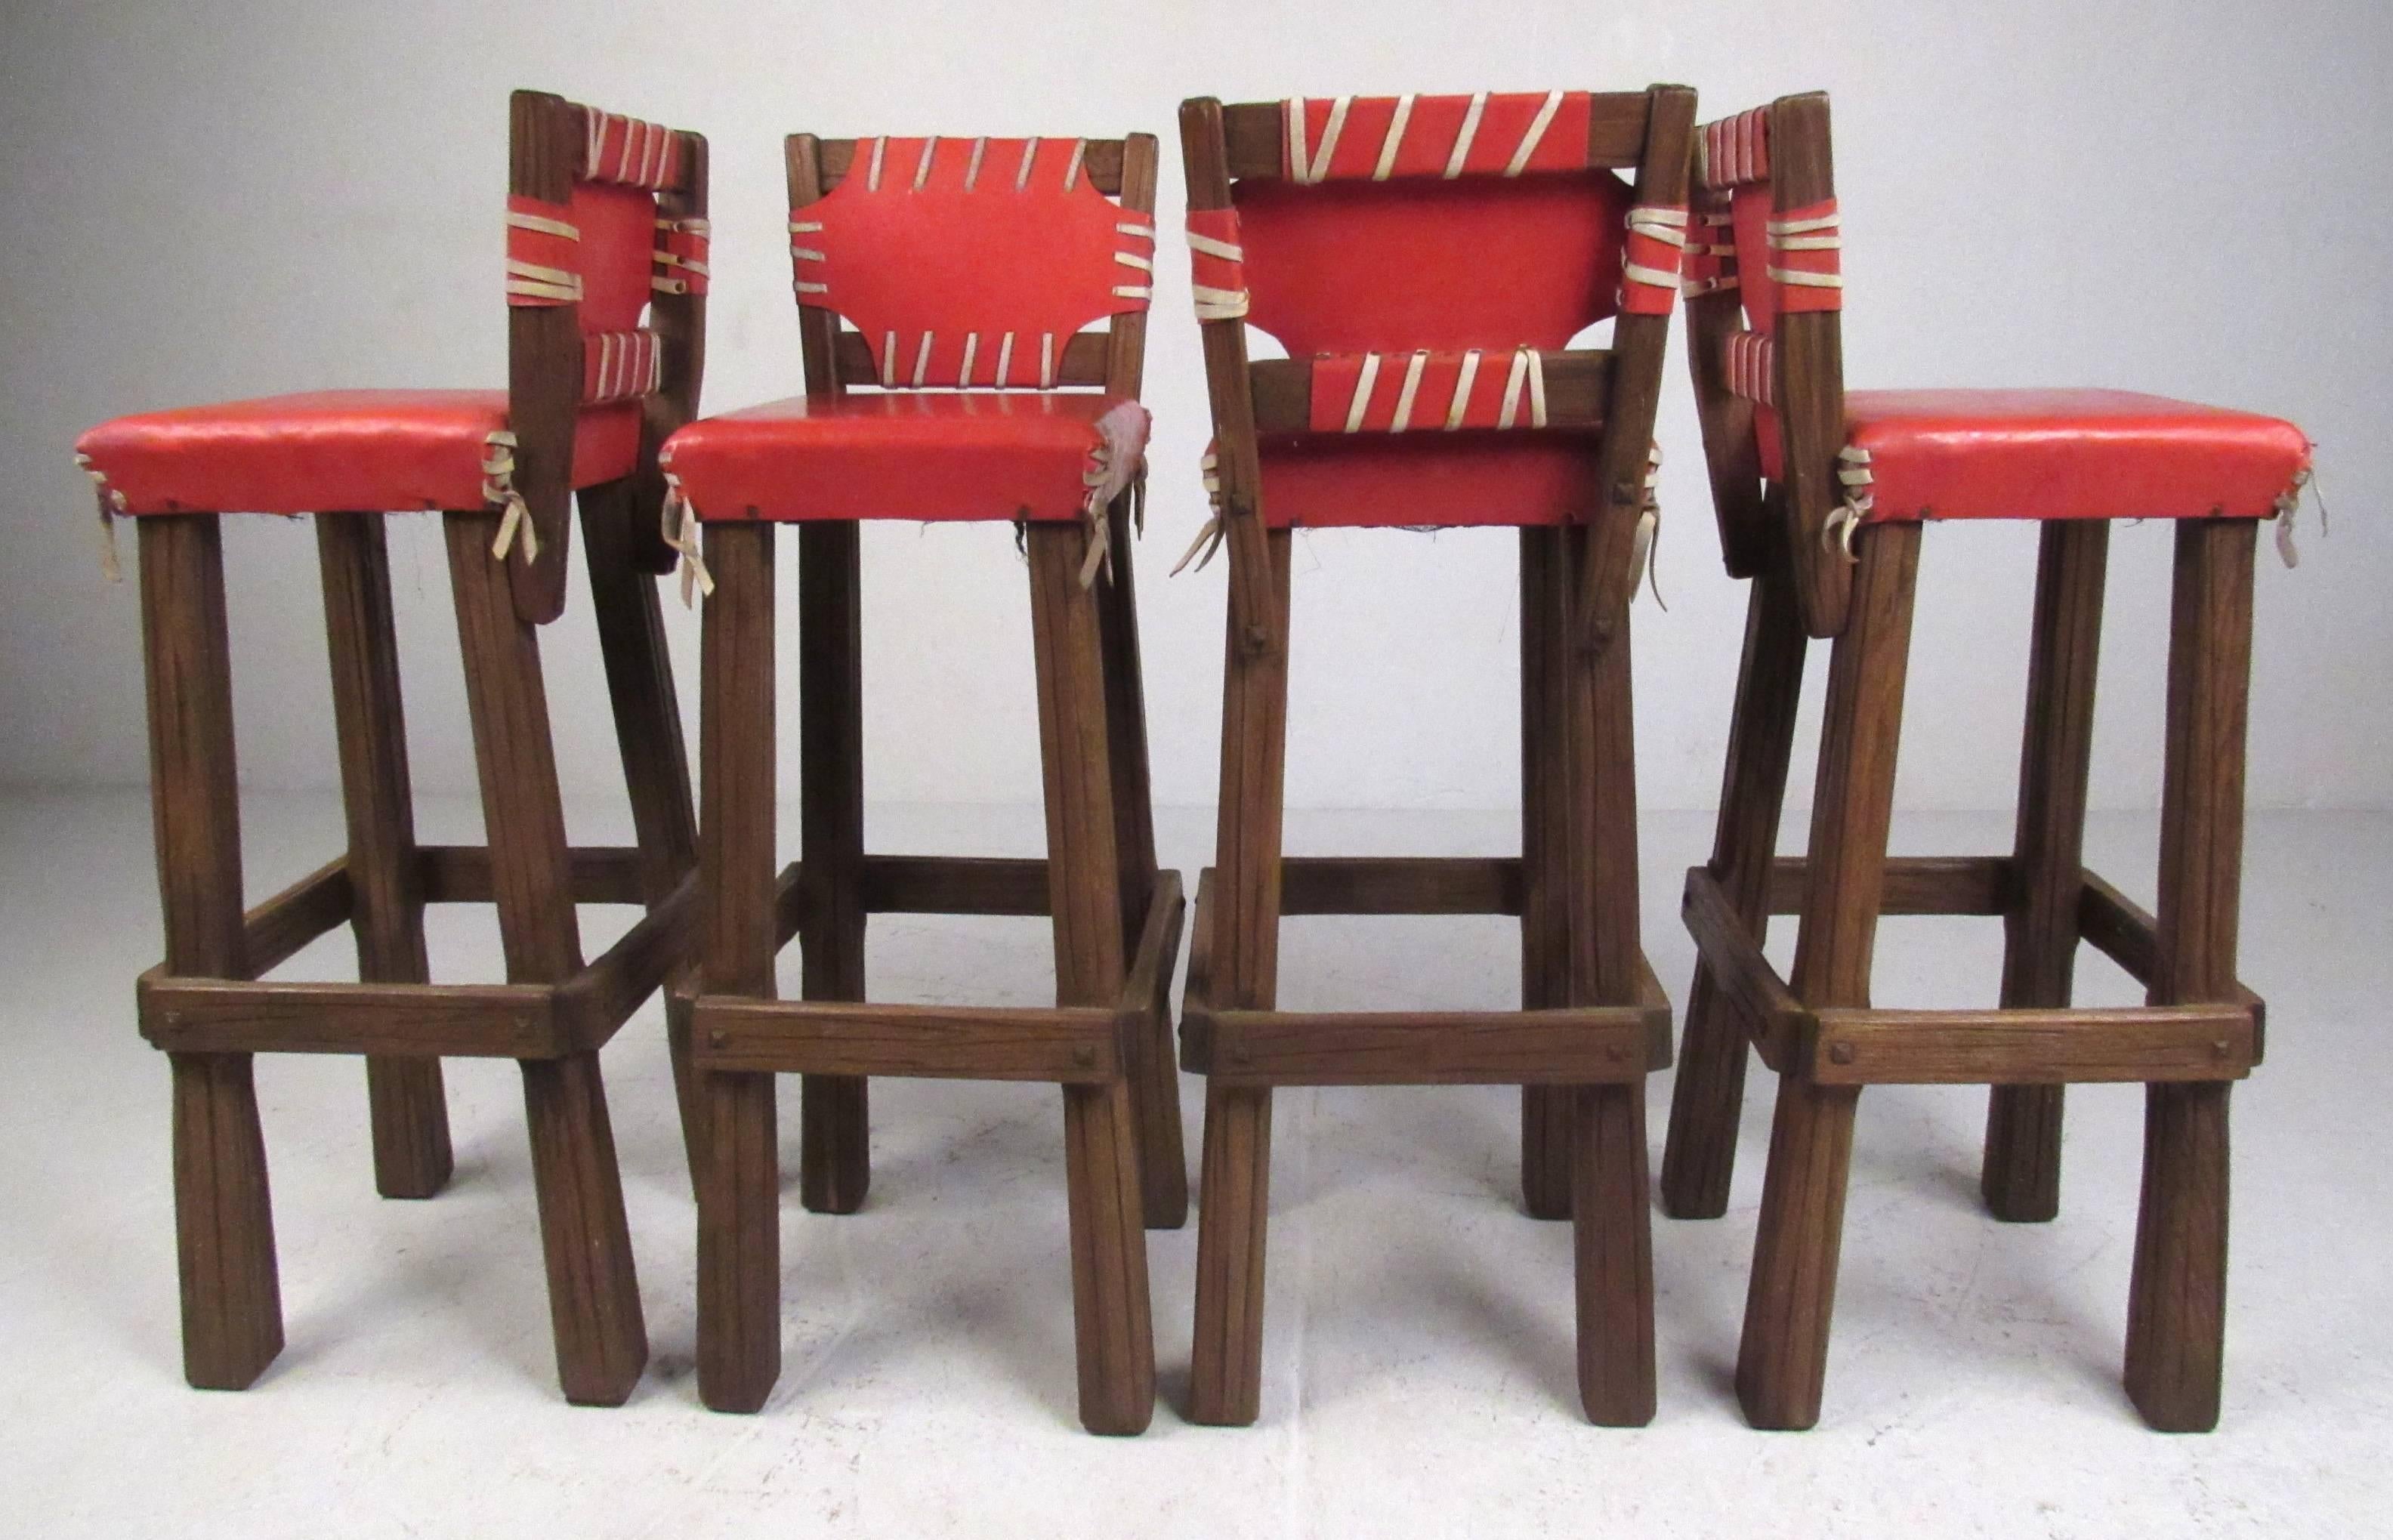 Rare set of Brandt Ranch solid oak bar stools with orange vinyl upholstery and suede tie backs. Please confirm item location (NY or NJ) with dealer.